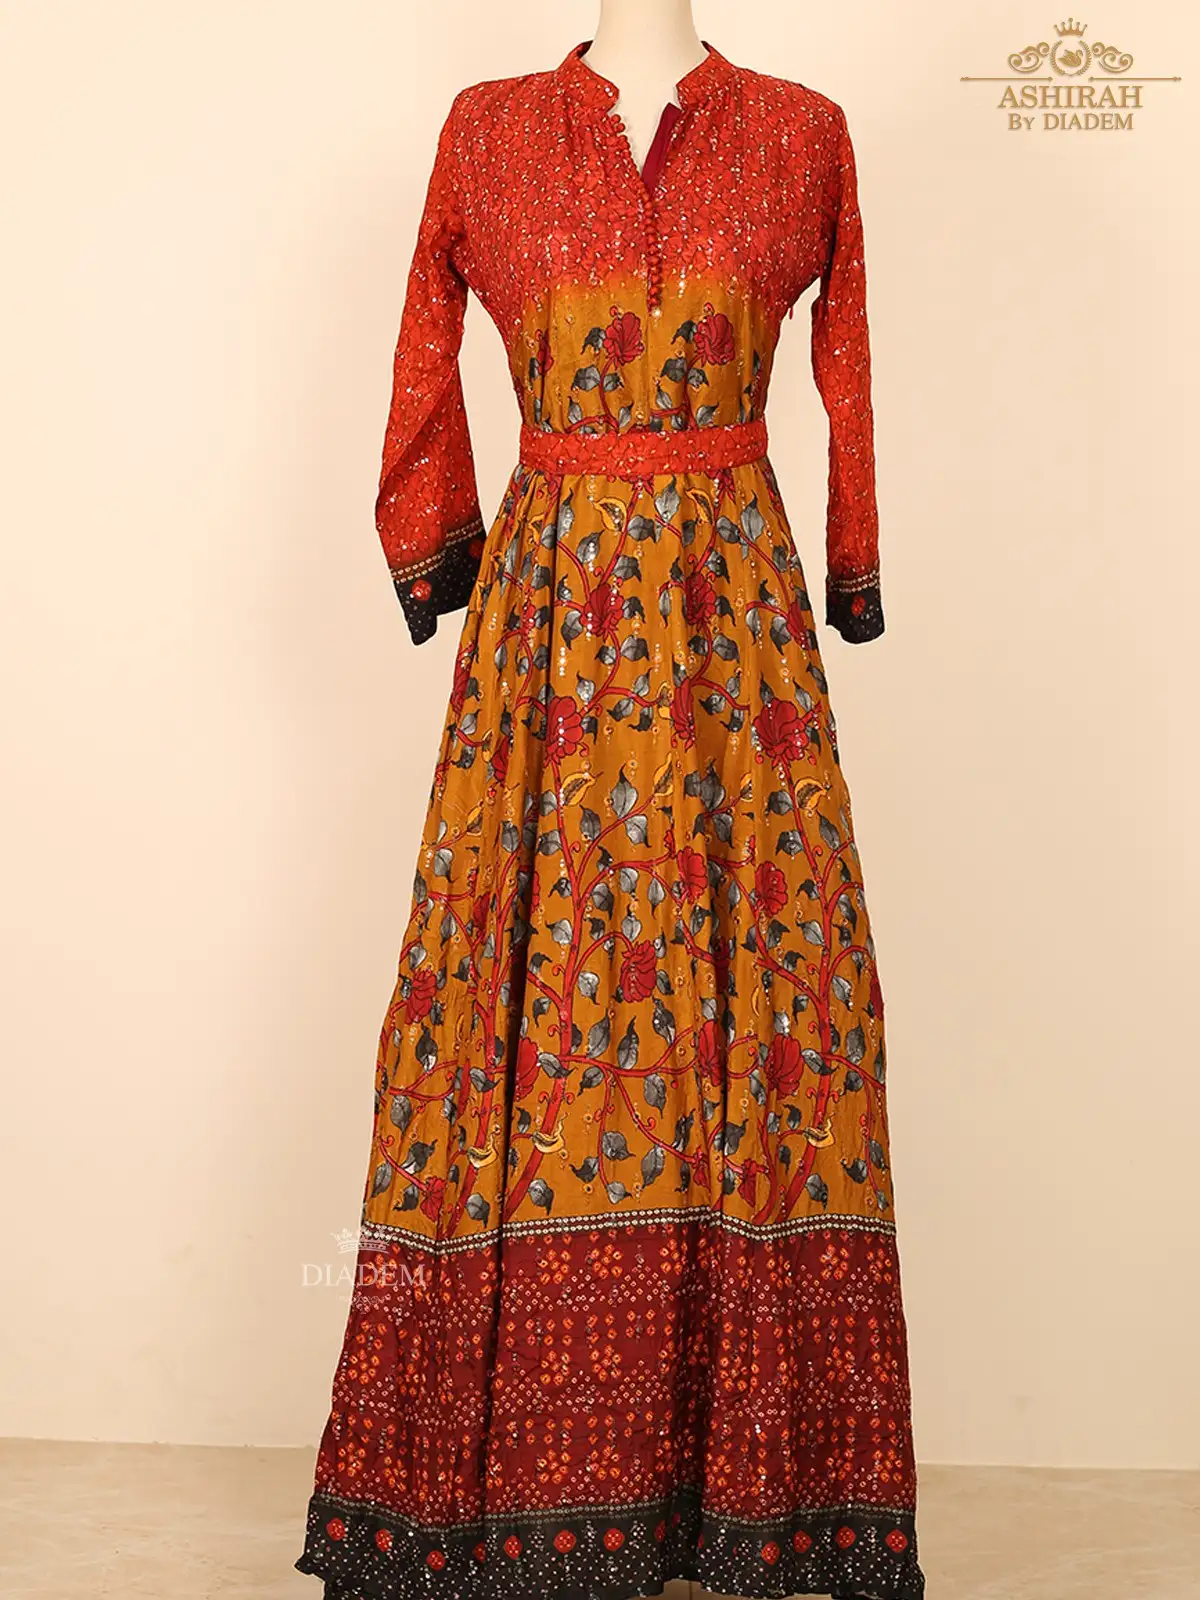 Red Orange Ombre Printed Long Kurti Enhanced In Floral Prints And Waist Belt